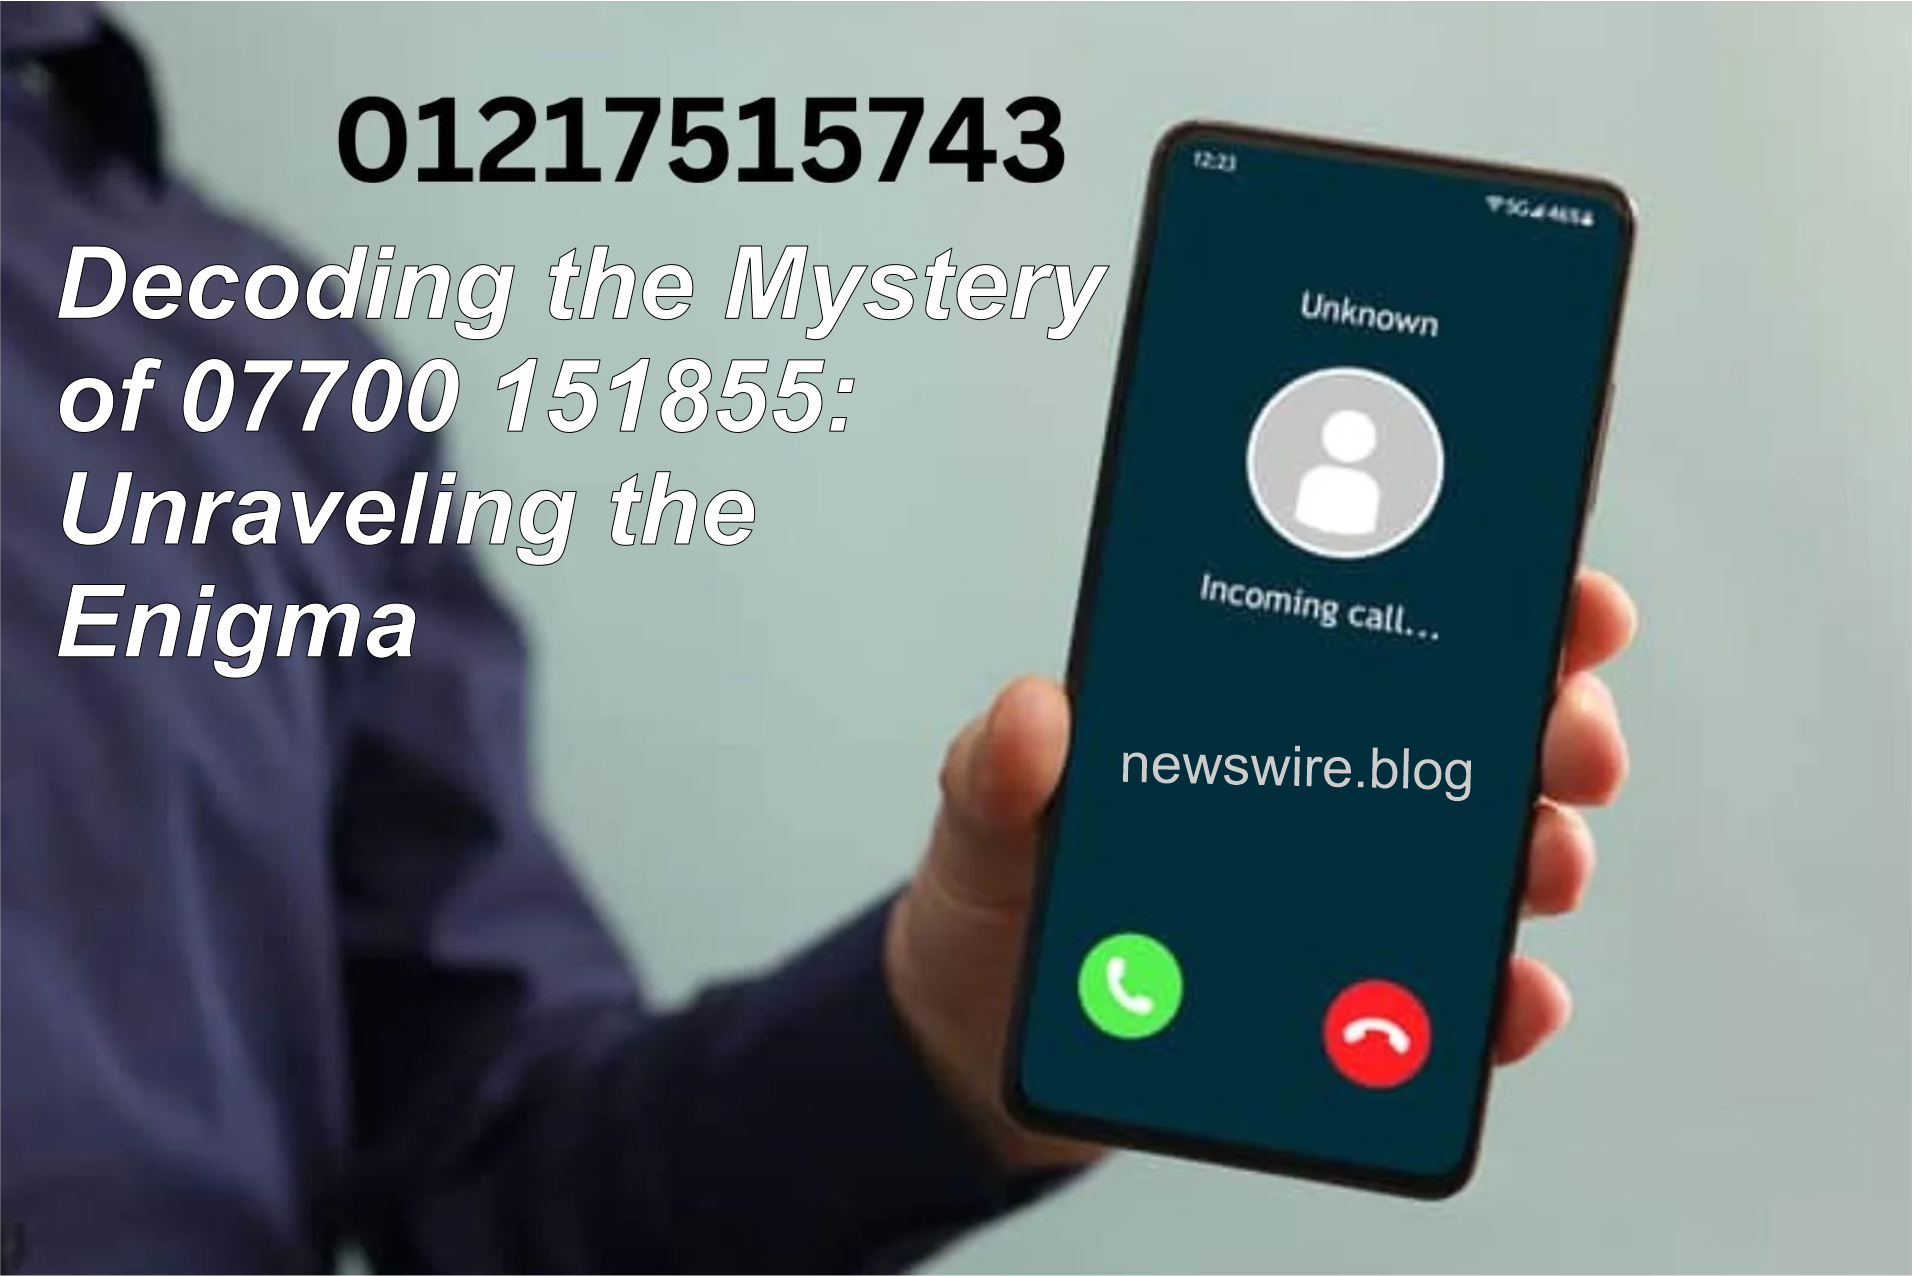 Decoding the Mystery of 07700 151855: Unraveling the Enigma